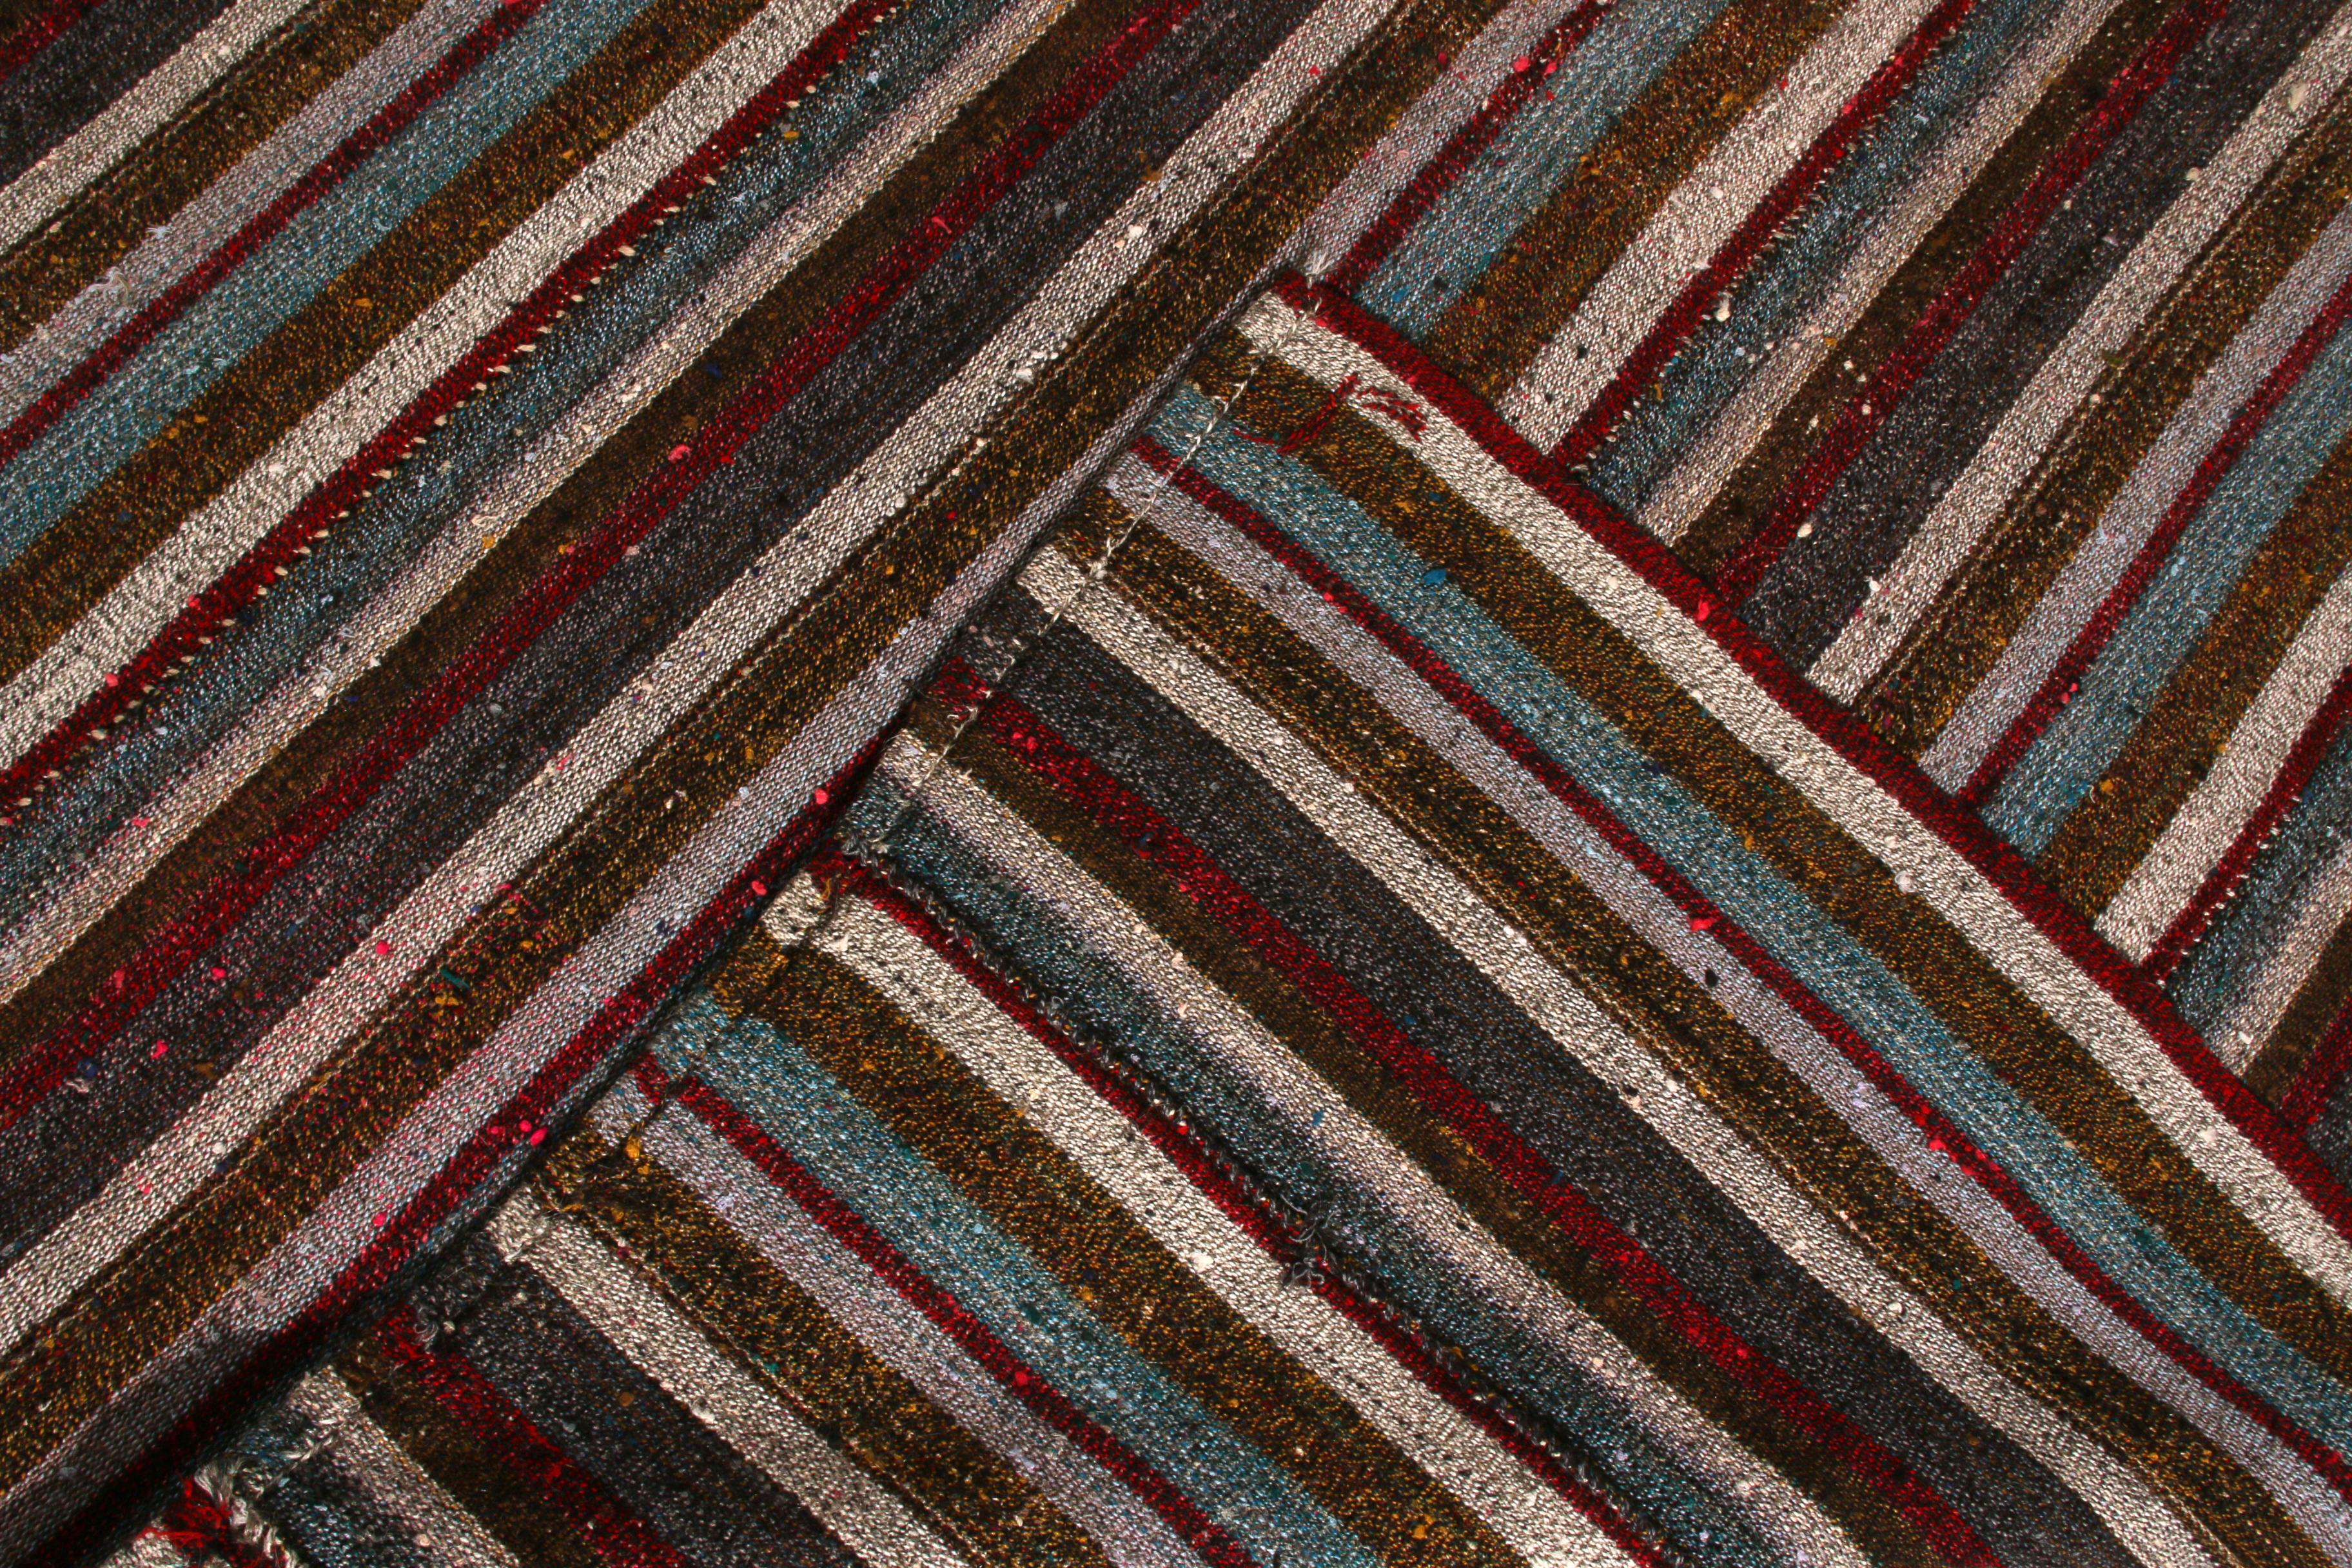 1950s Vintage Midcentury Kilim Beige-Brown & Red Striped Pattern by Rug & Kilim In Good Condition For Sale In Long Island City, NY